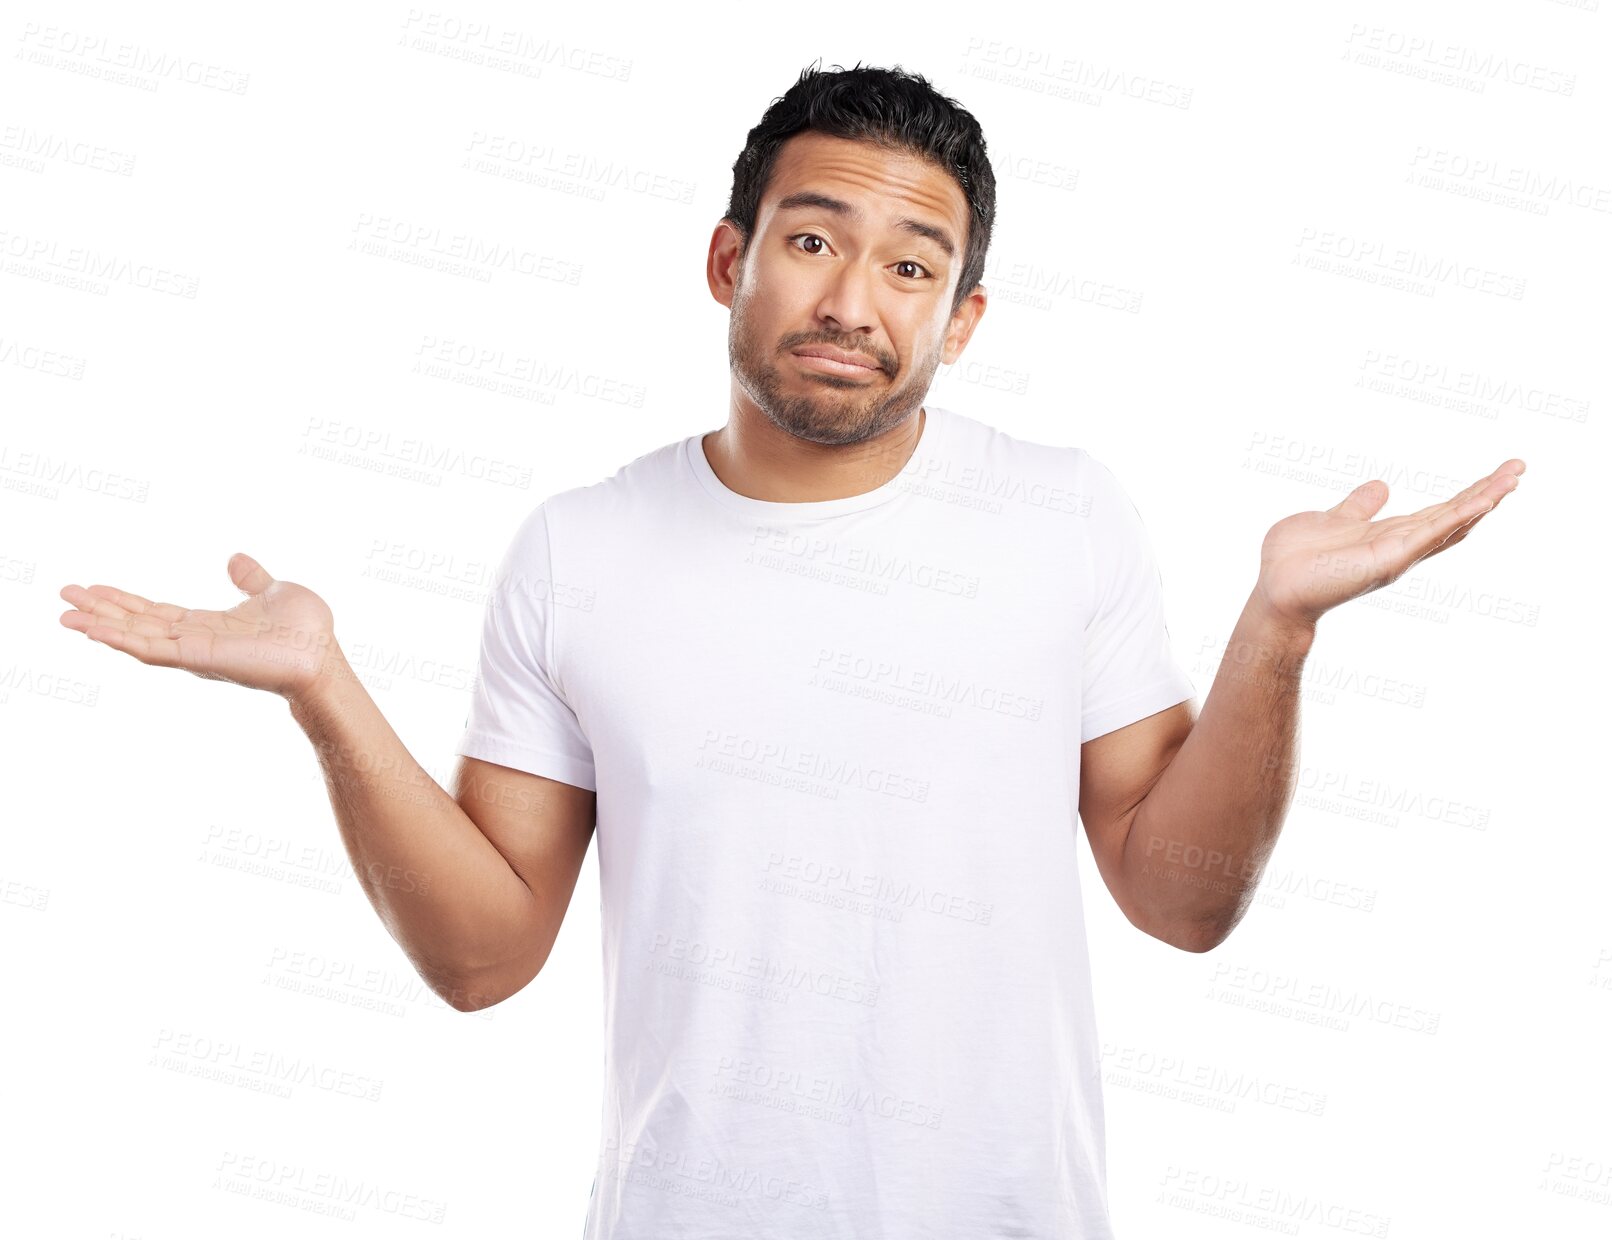 Buy stock photo Portrait, man and hands up in confusion, ignorance and isolated transparent png background. Male person, lost and clueless with shrugging shoulders with squinting expression, doubt and frown